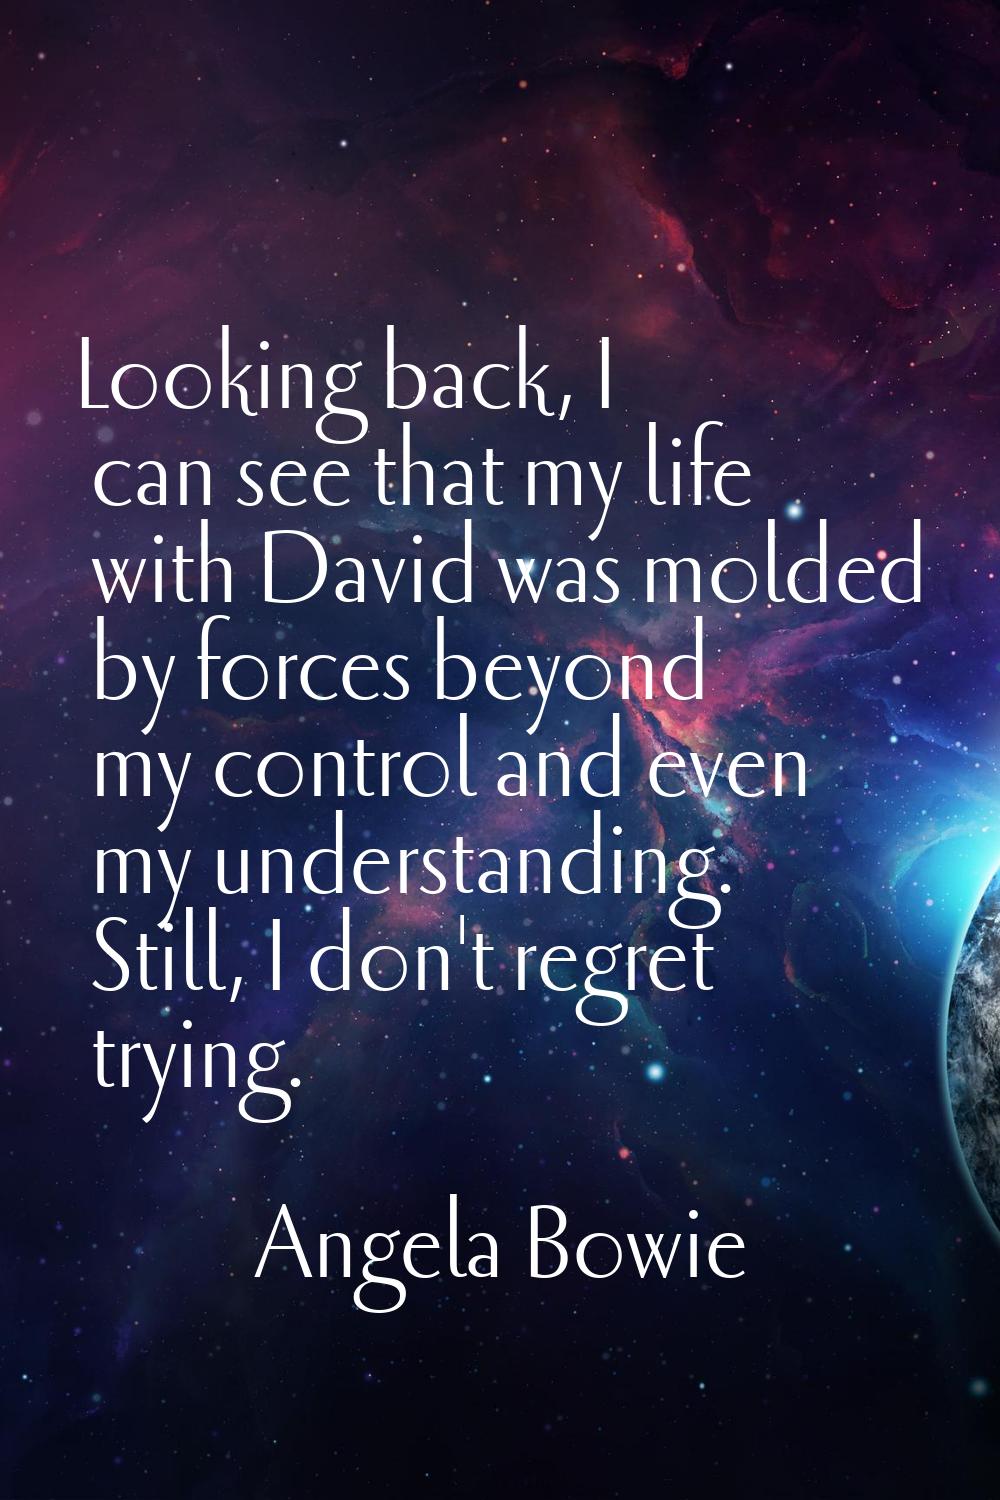 Looking back, I can see that my life with David was molded by forces beyond my control and even my 